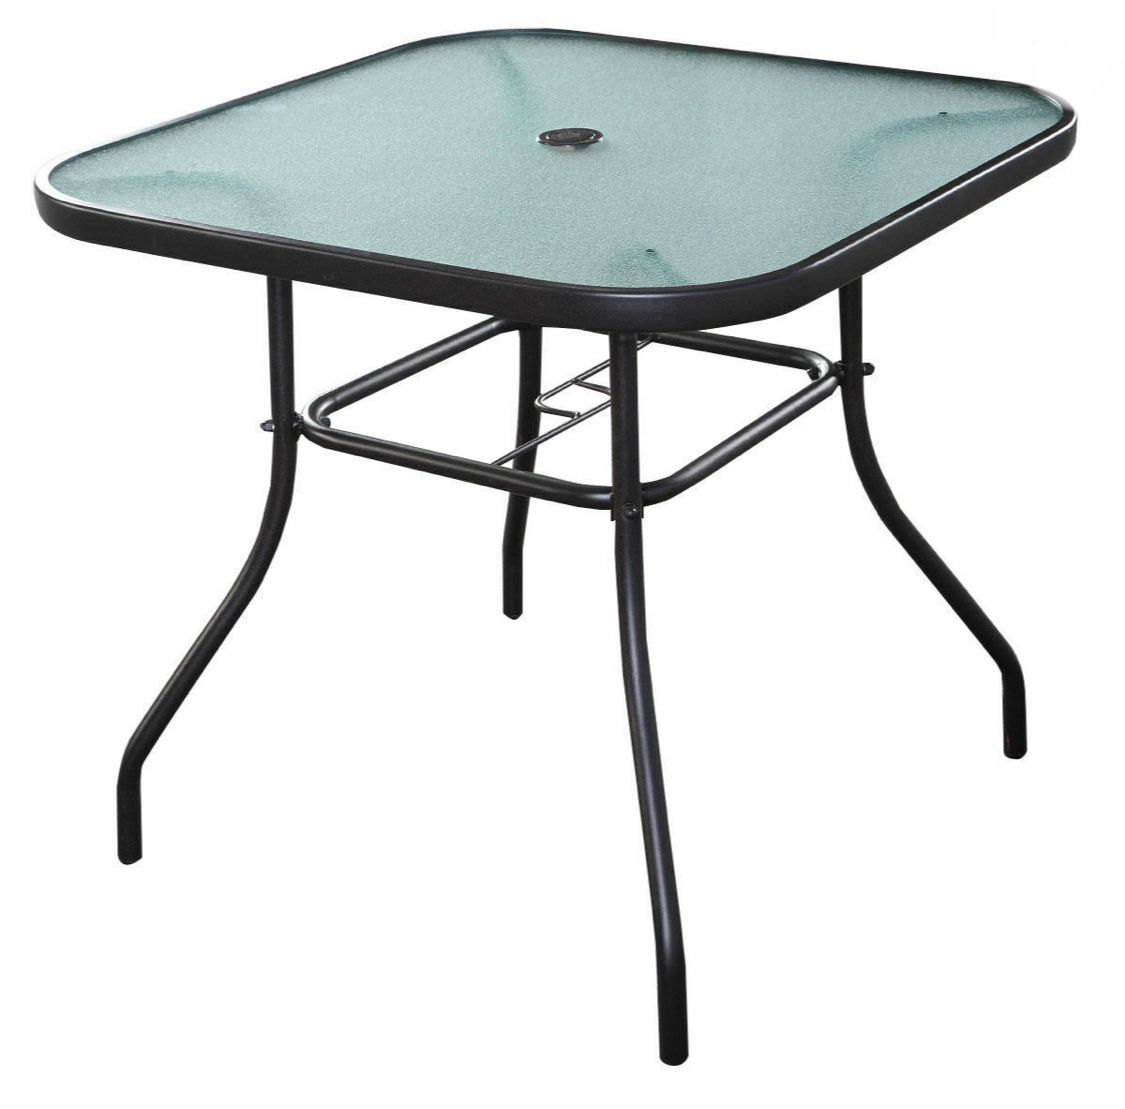 Costway HW 51791 Outdoor Square Patio Table - NEW IN BOX